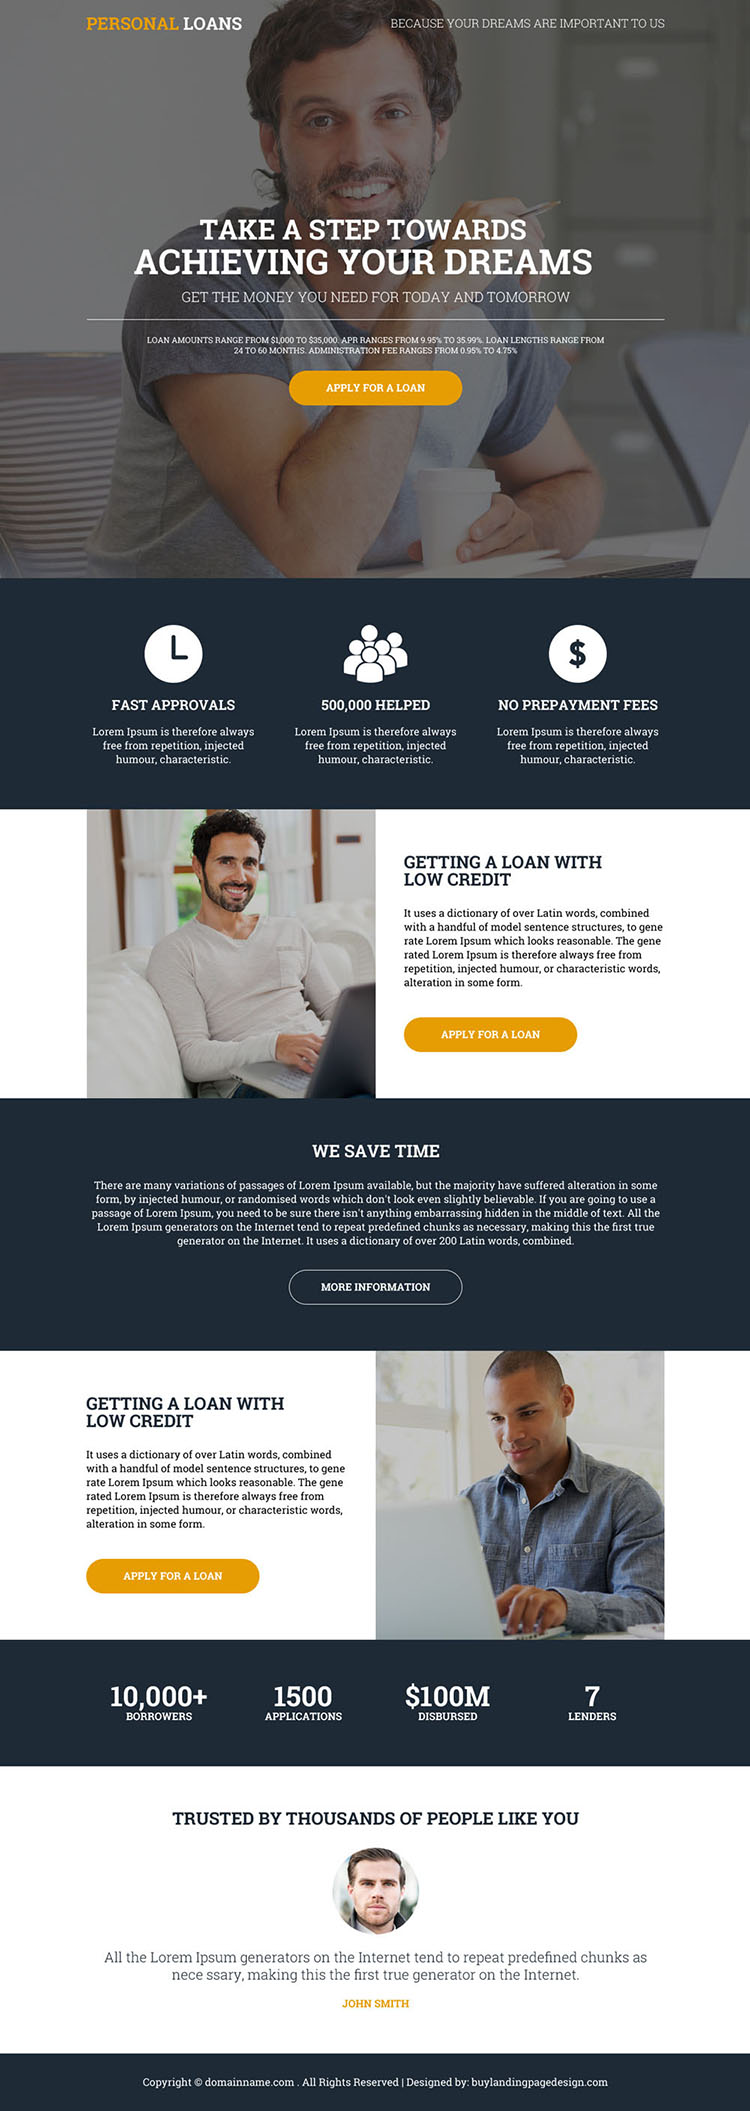 apply for a personal loan responsive landing page